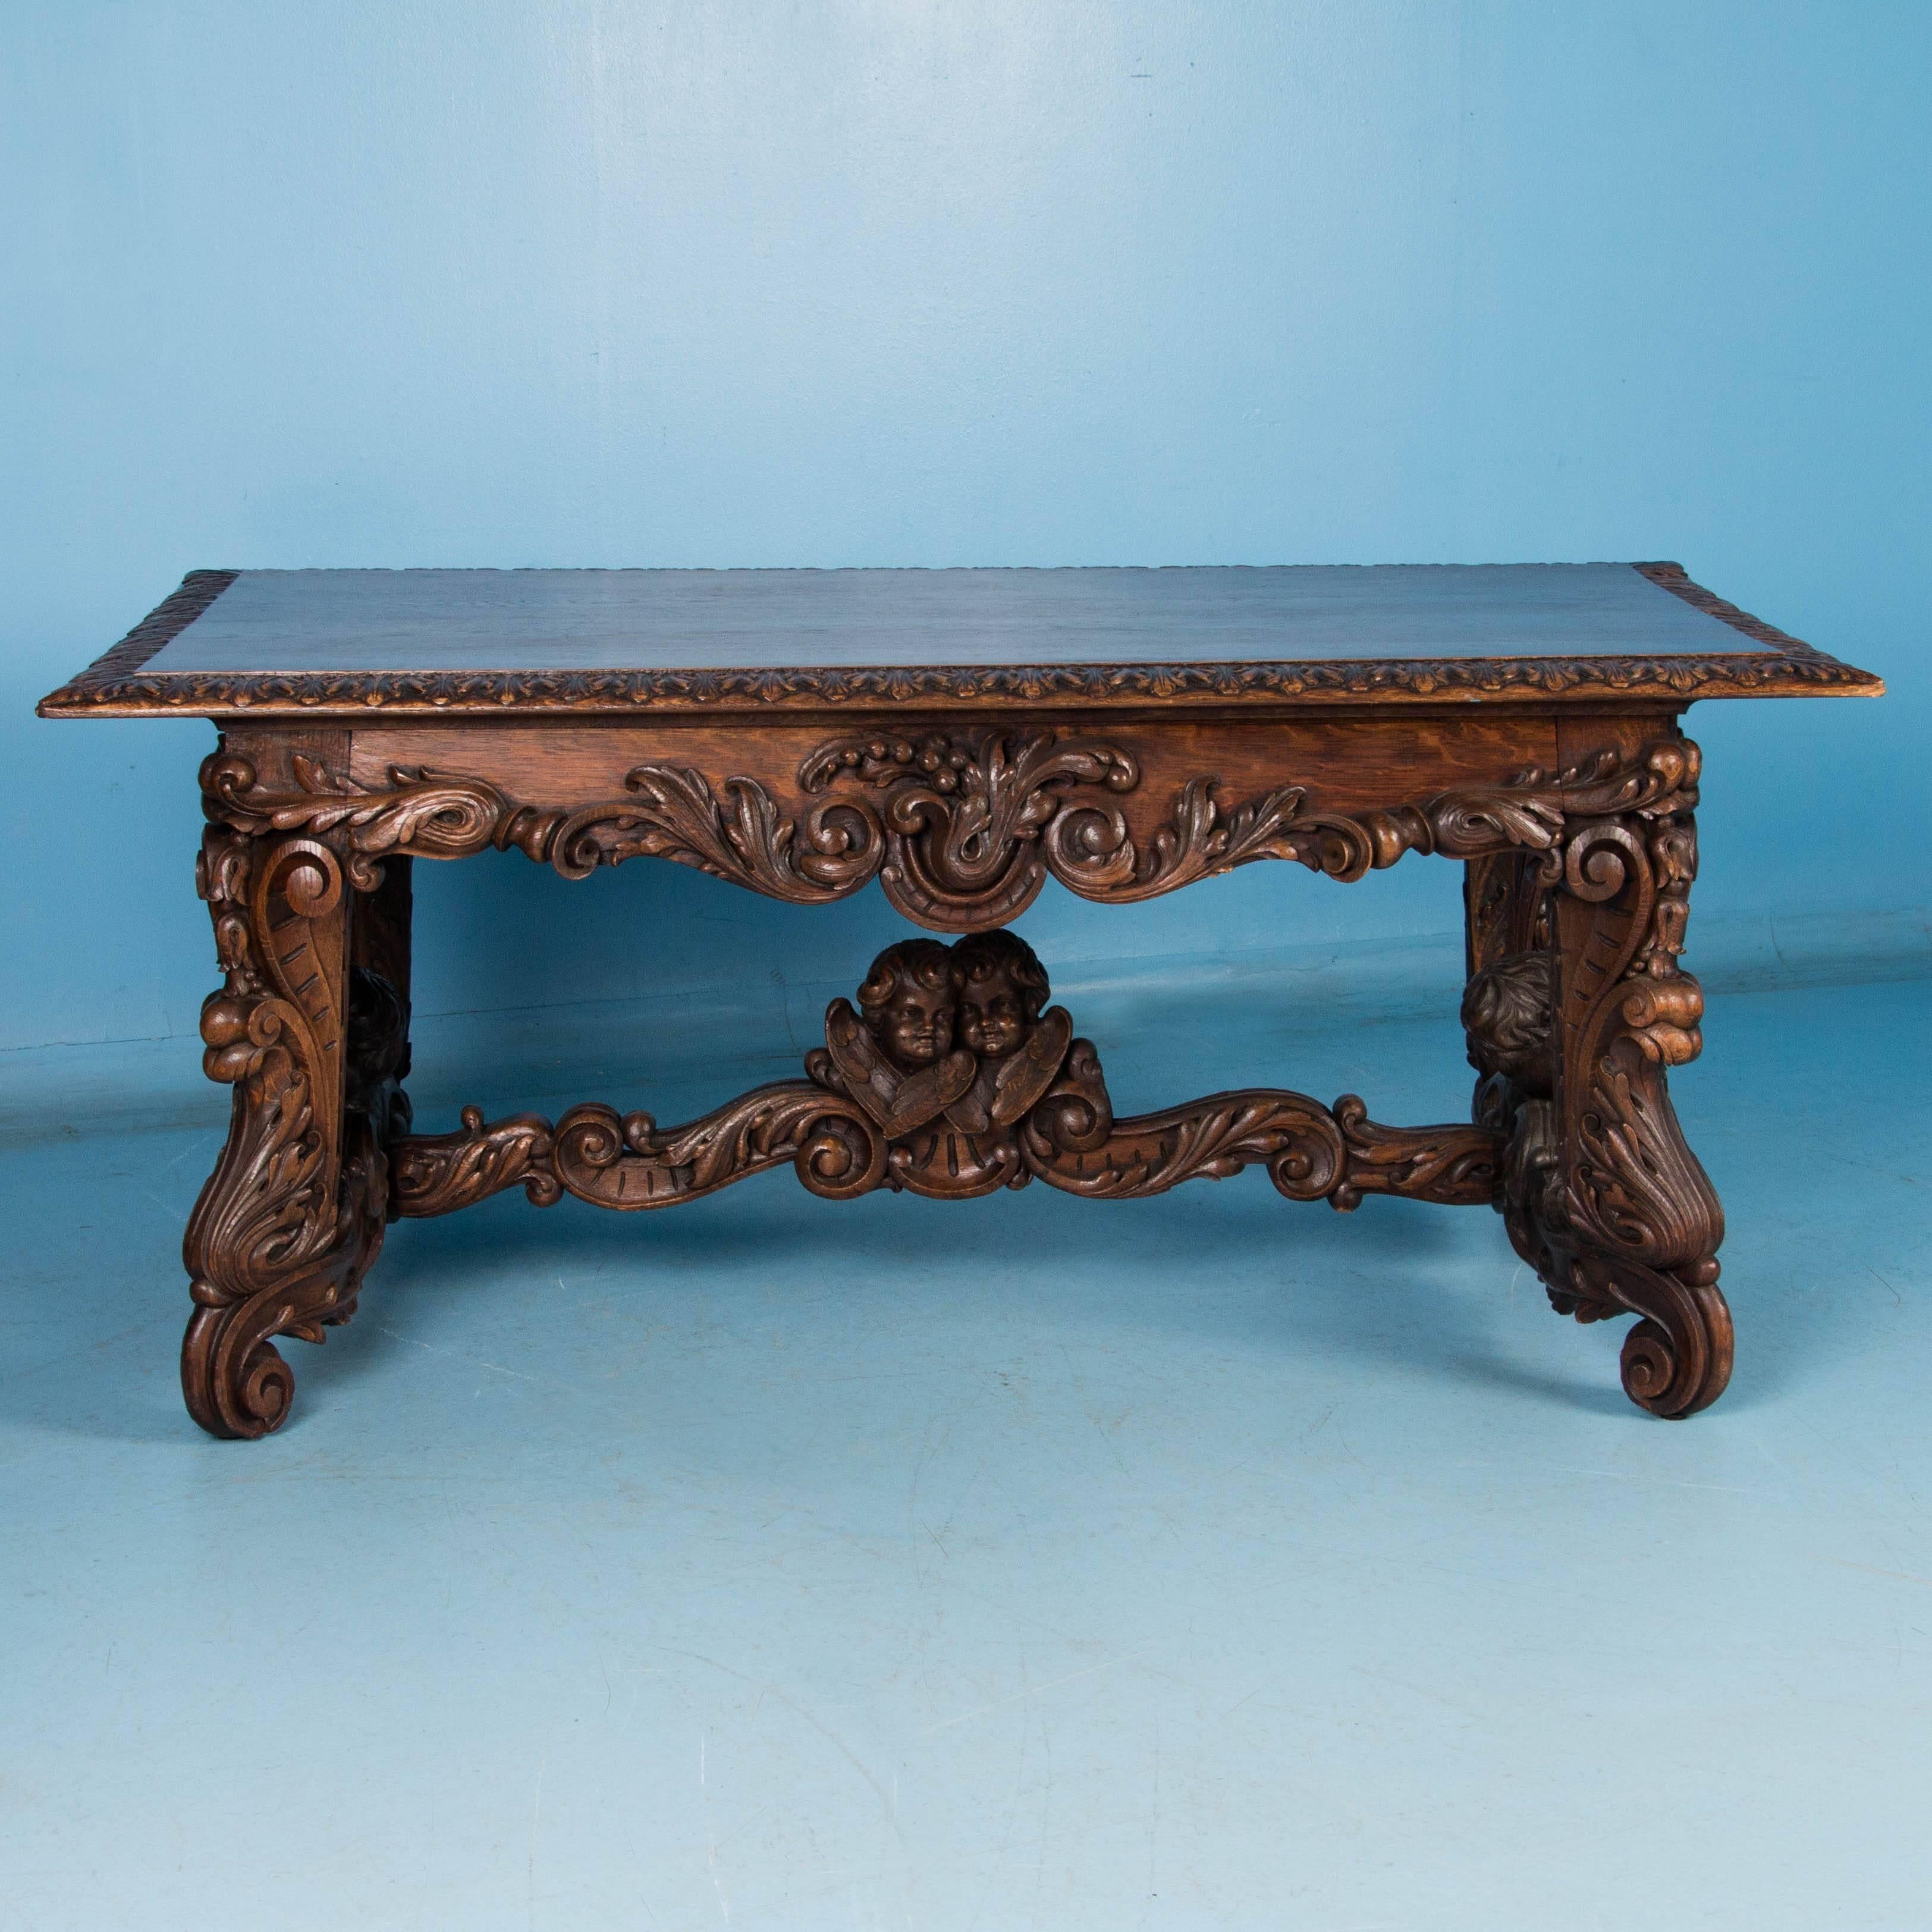 
This highly carved library or entry table is visually stunning due to the exceptional French craftsmanship and elaborate carving throughout the base. The superb details include multiple cherubs, bell flowers, acanthus leaves and more. Made of